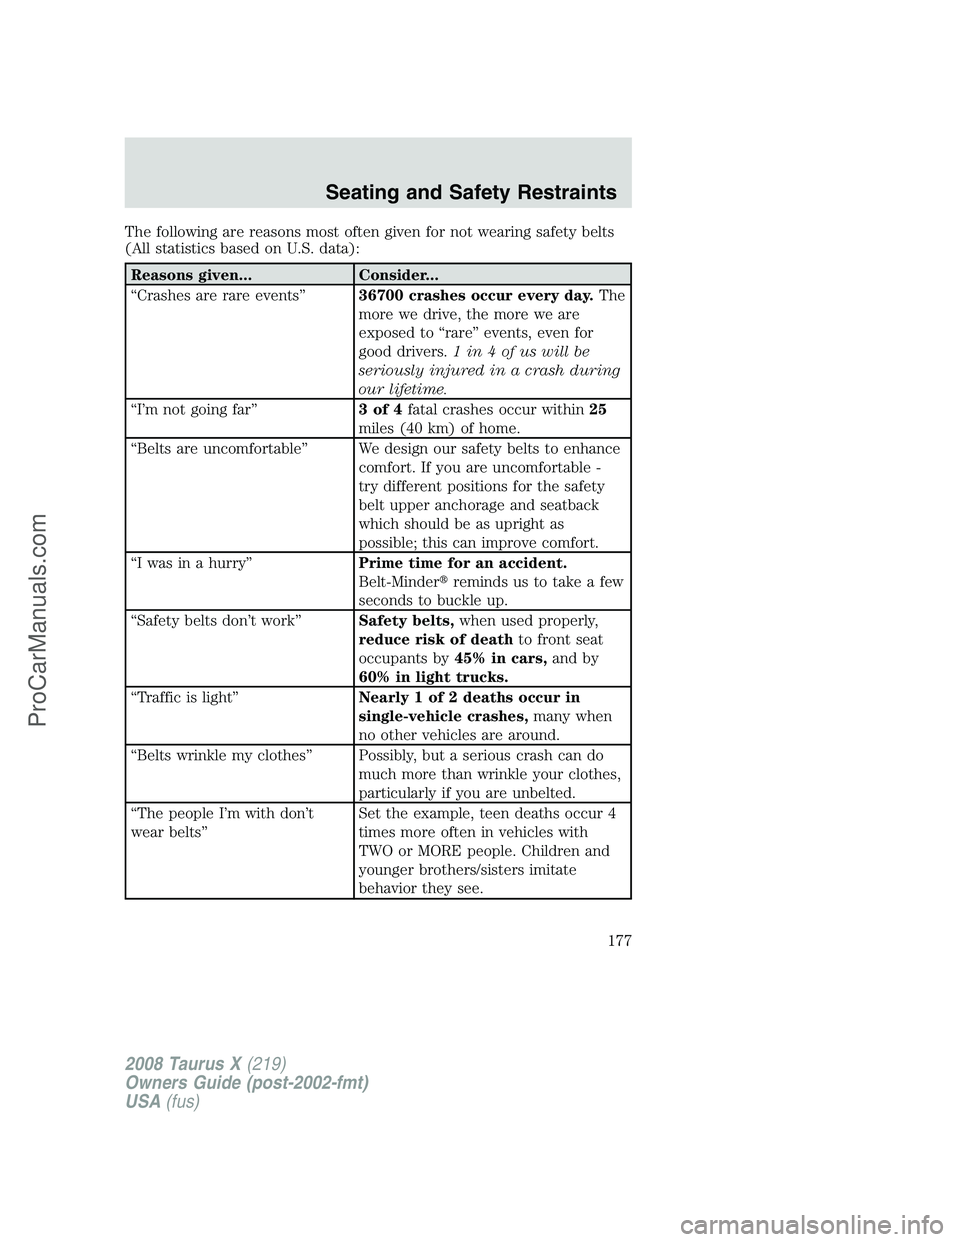 FORD FREESTYLE 2008  Owners Manual The following are reasons most often given for not wearing safety belts
(All statistics based on U.S. data):
Reasons given... Consider...
“Crashes are rare events”36700 crashes occur every day.The